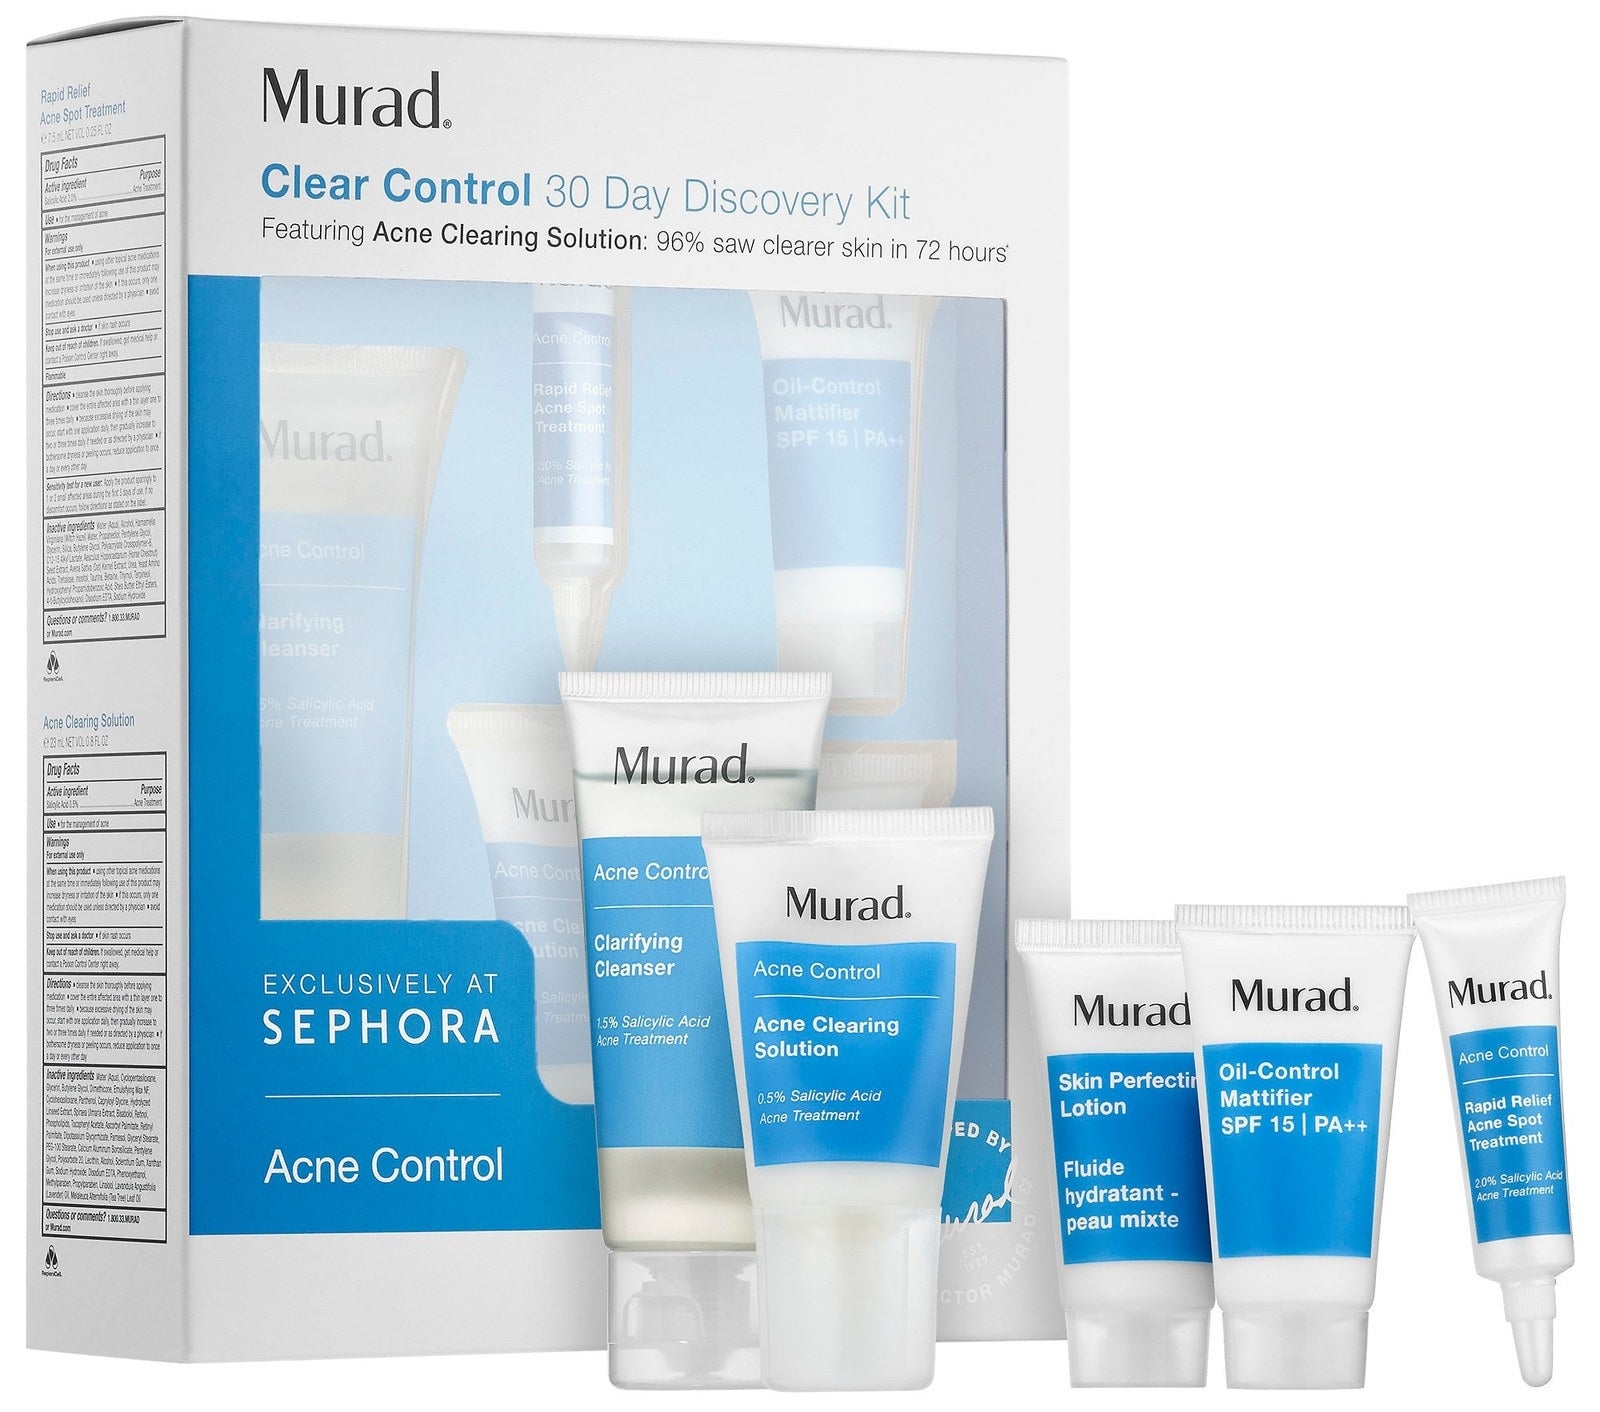 Clear control. Acne Discovery Kit. Аналог Murad Anti acne. Oil Control acne. Acne Control Oil and Pore Control Mattifier broad Spectrum SPF 45 | pa++++ Murad.